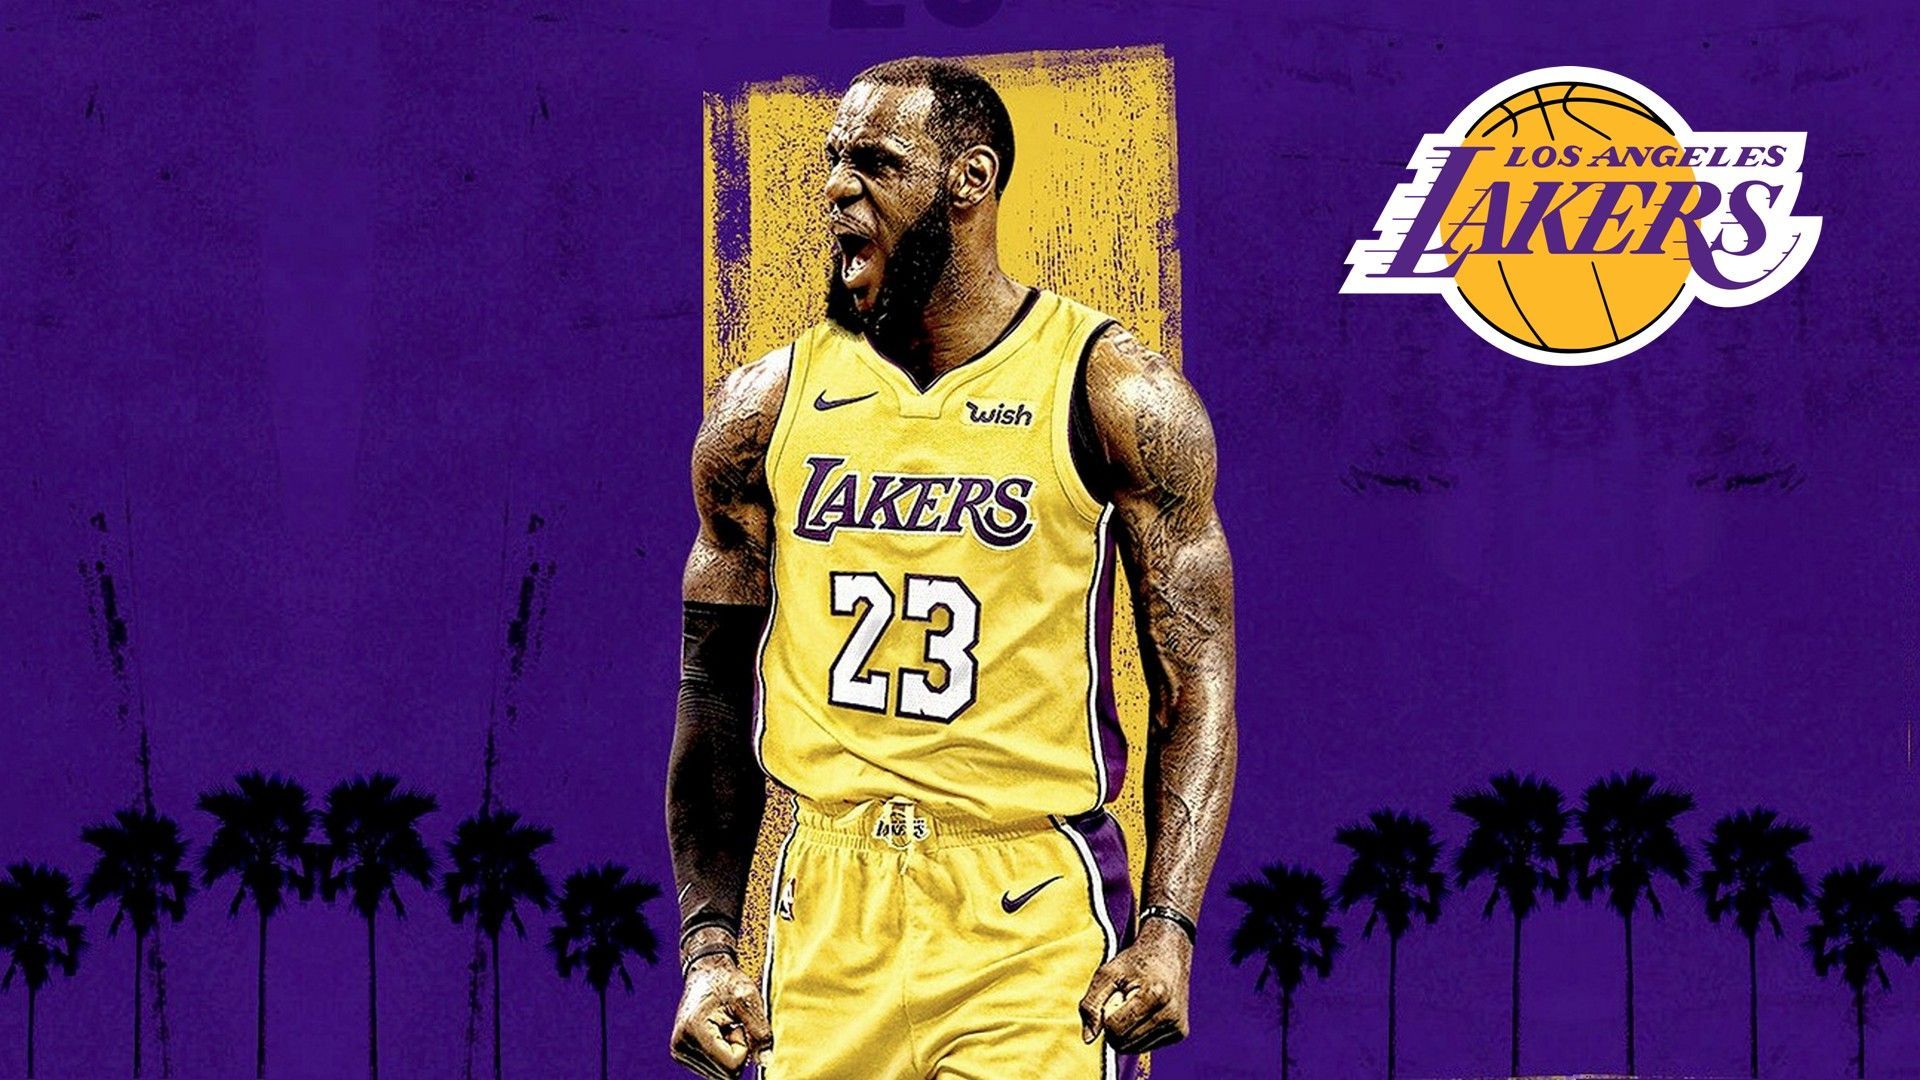 LeBron James Lakers Desktop Wallpaper is the perfect High Quality